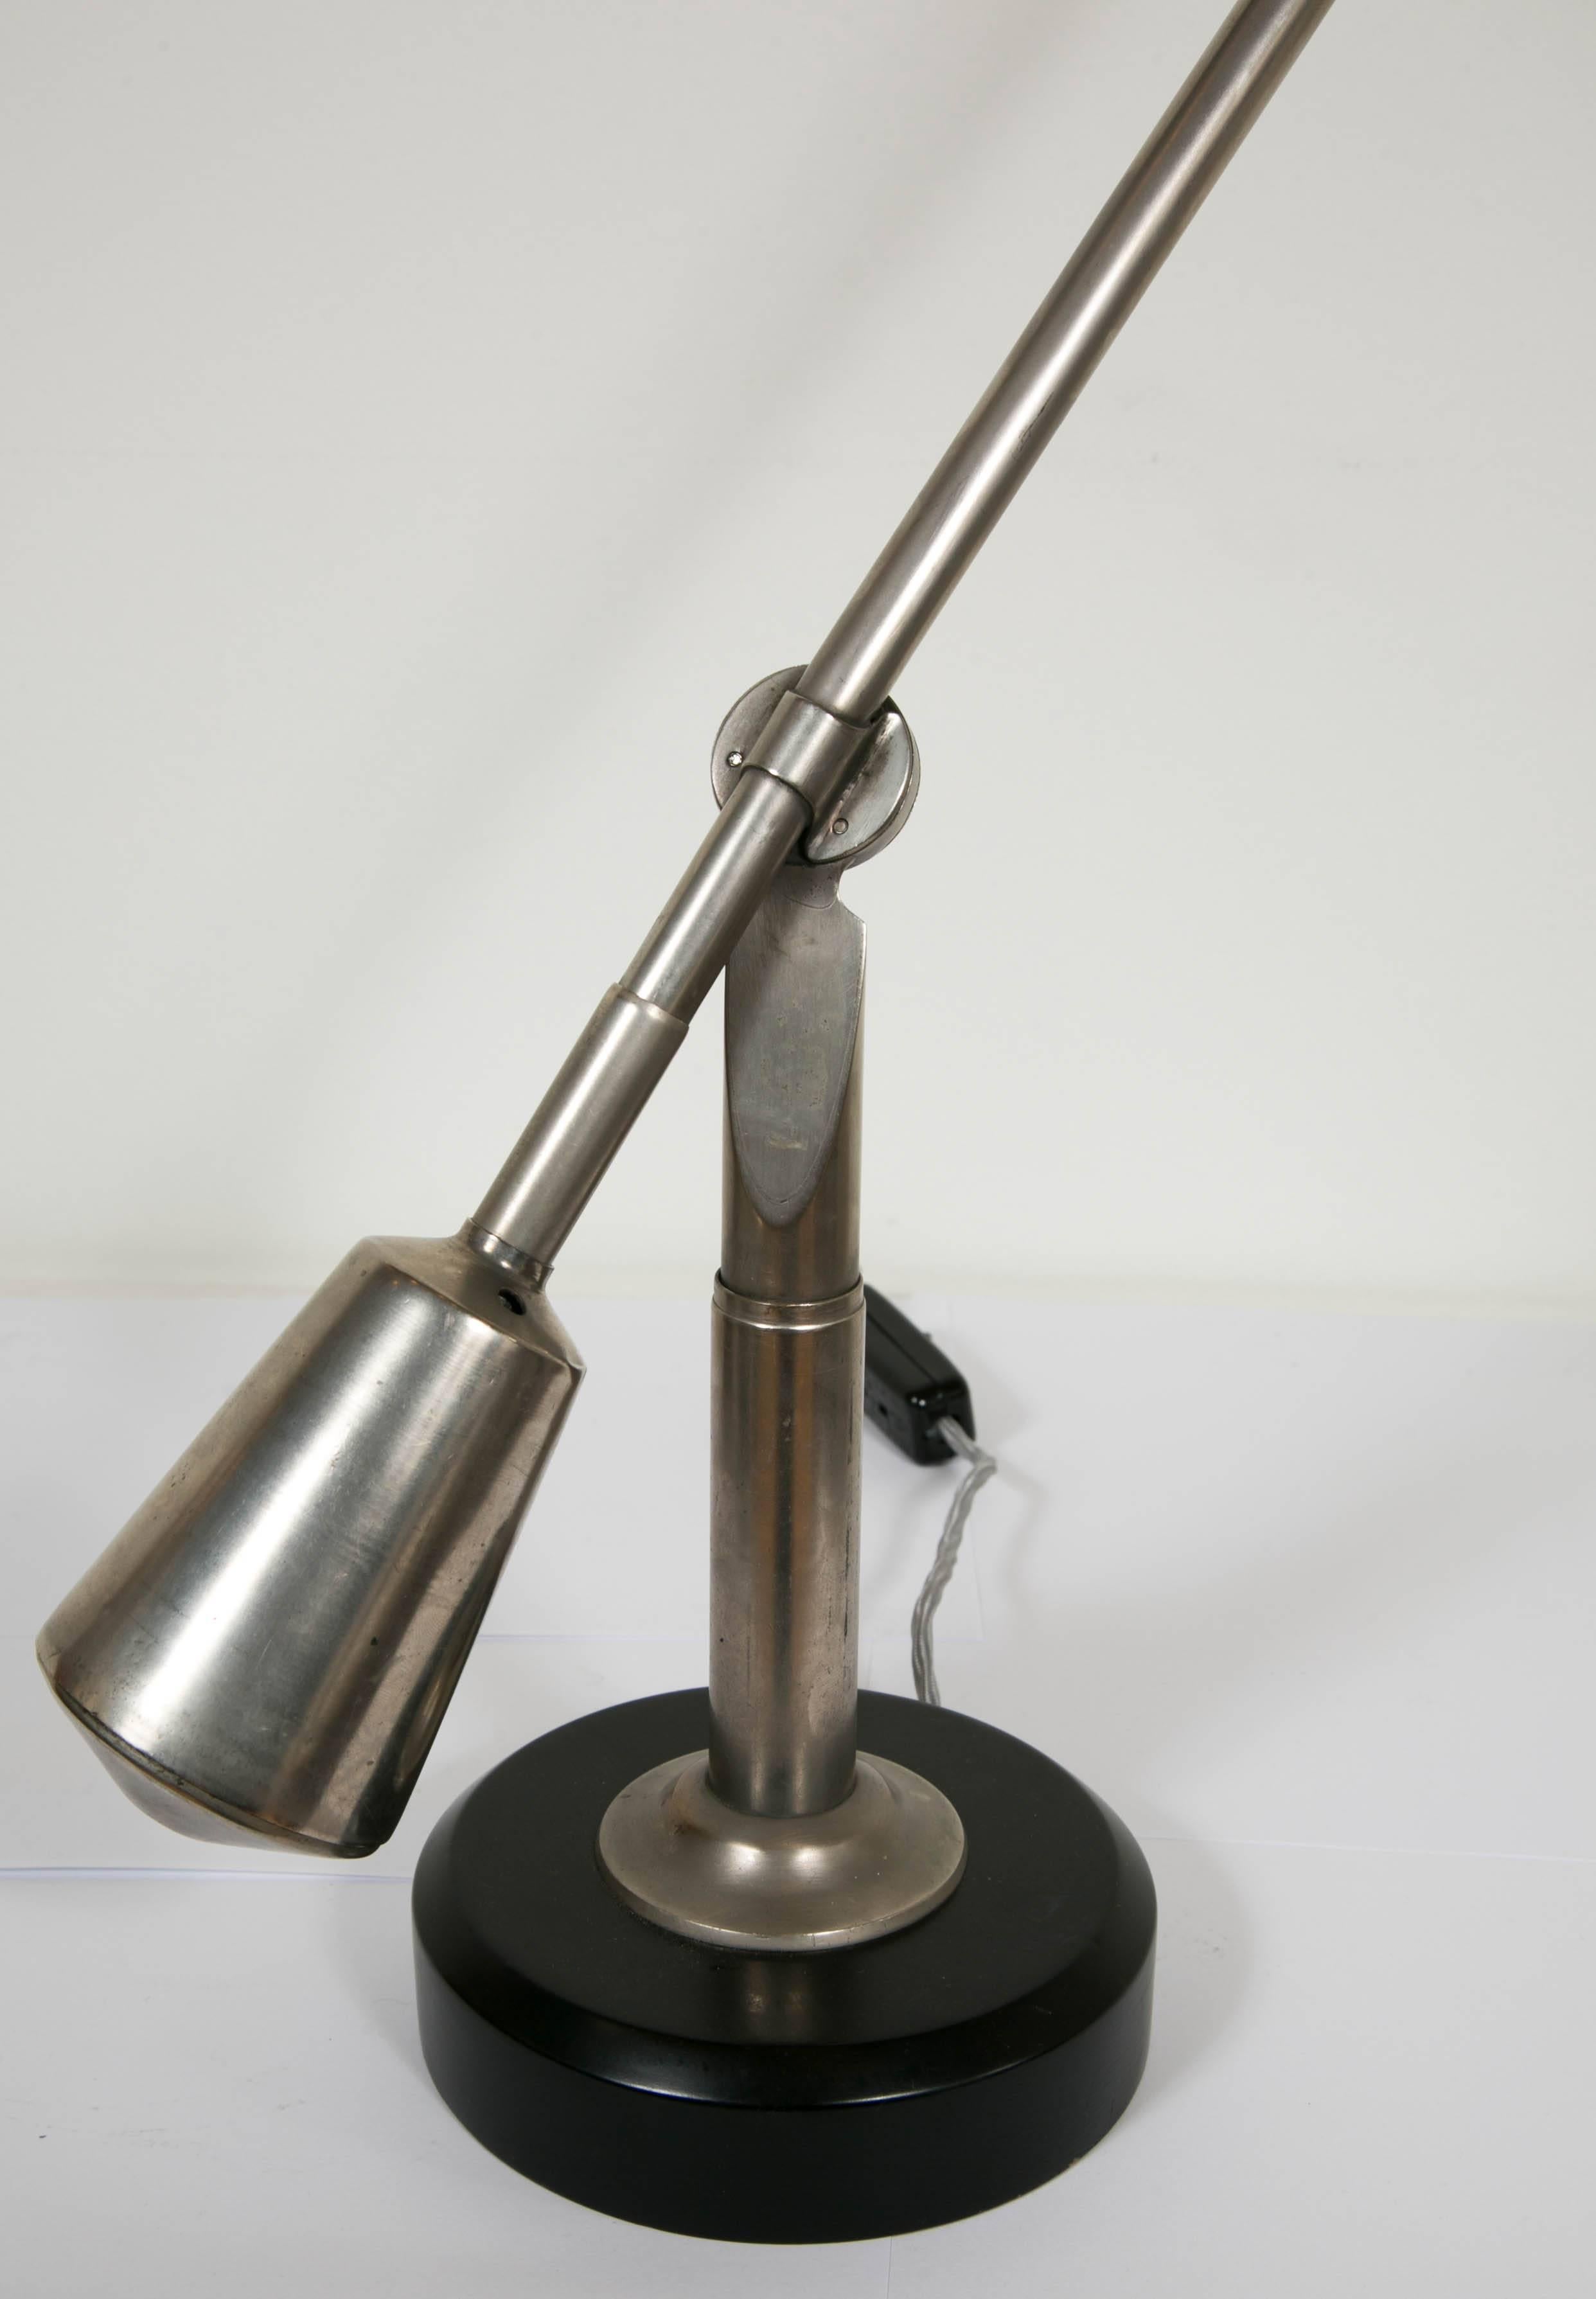 This iconic lamp is an original one and the most sought after lamp designed by Edouard-Wilfred Buquet (1886-?). It is an articulated lamp with two arms. It is balanced like a mobile with two adjustable counterweights. It is made of nickel-plated